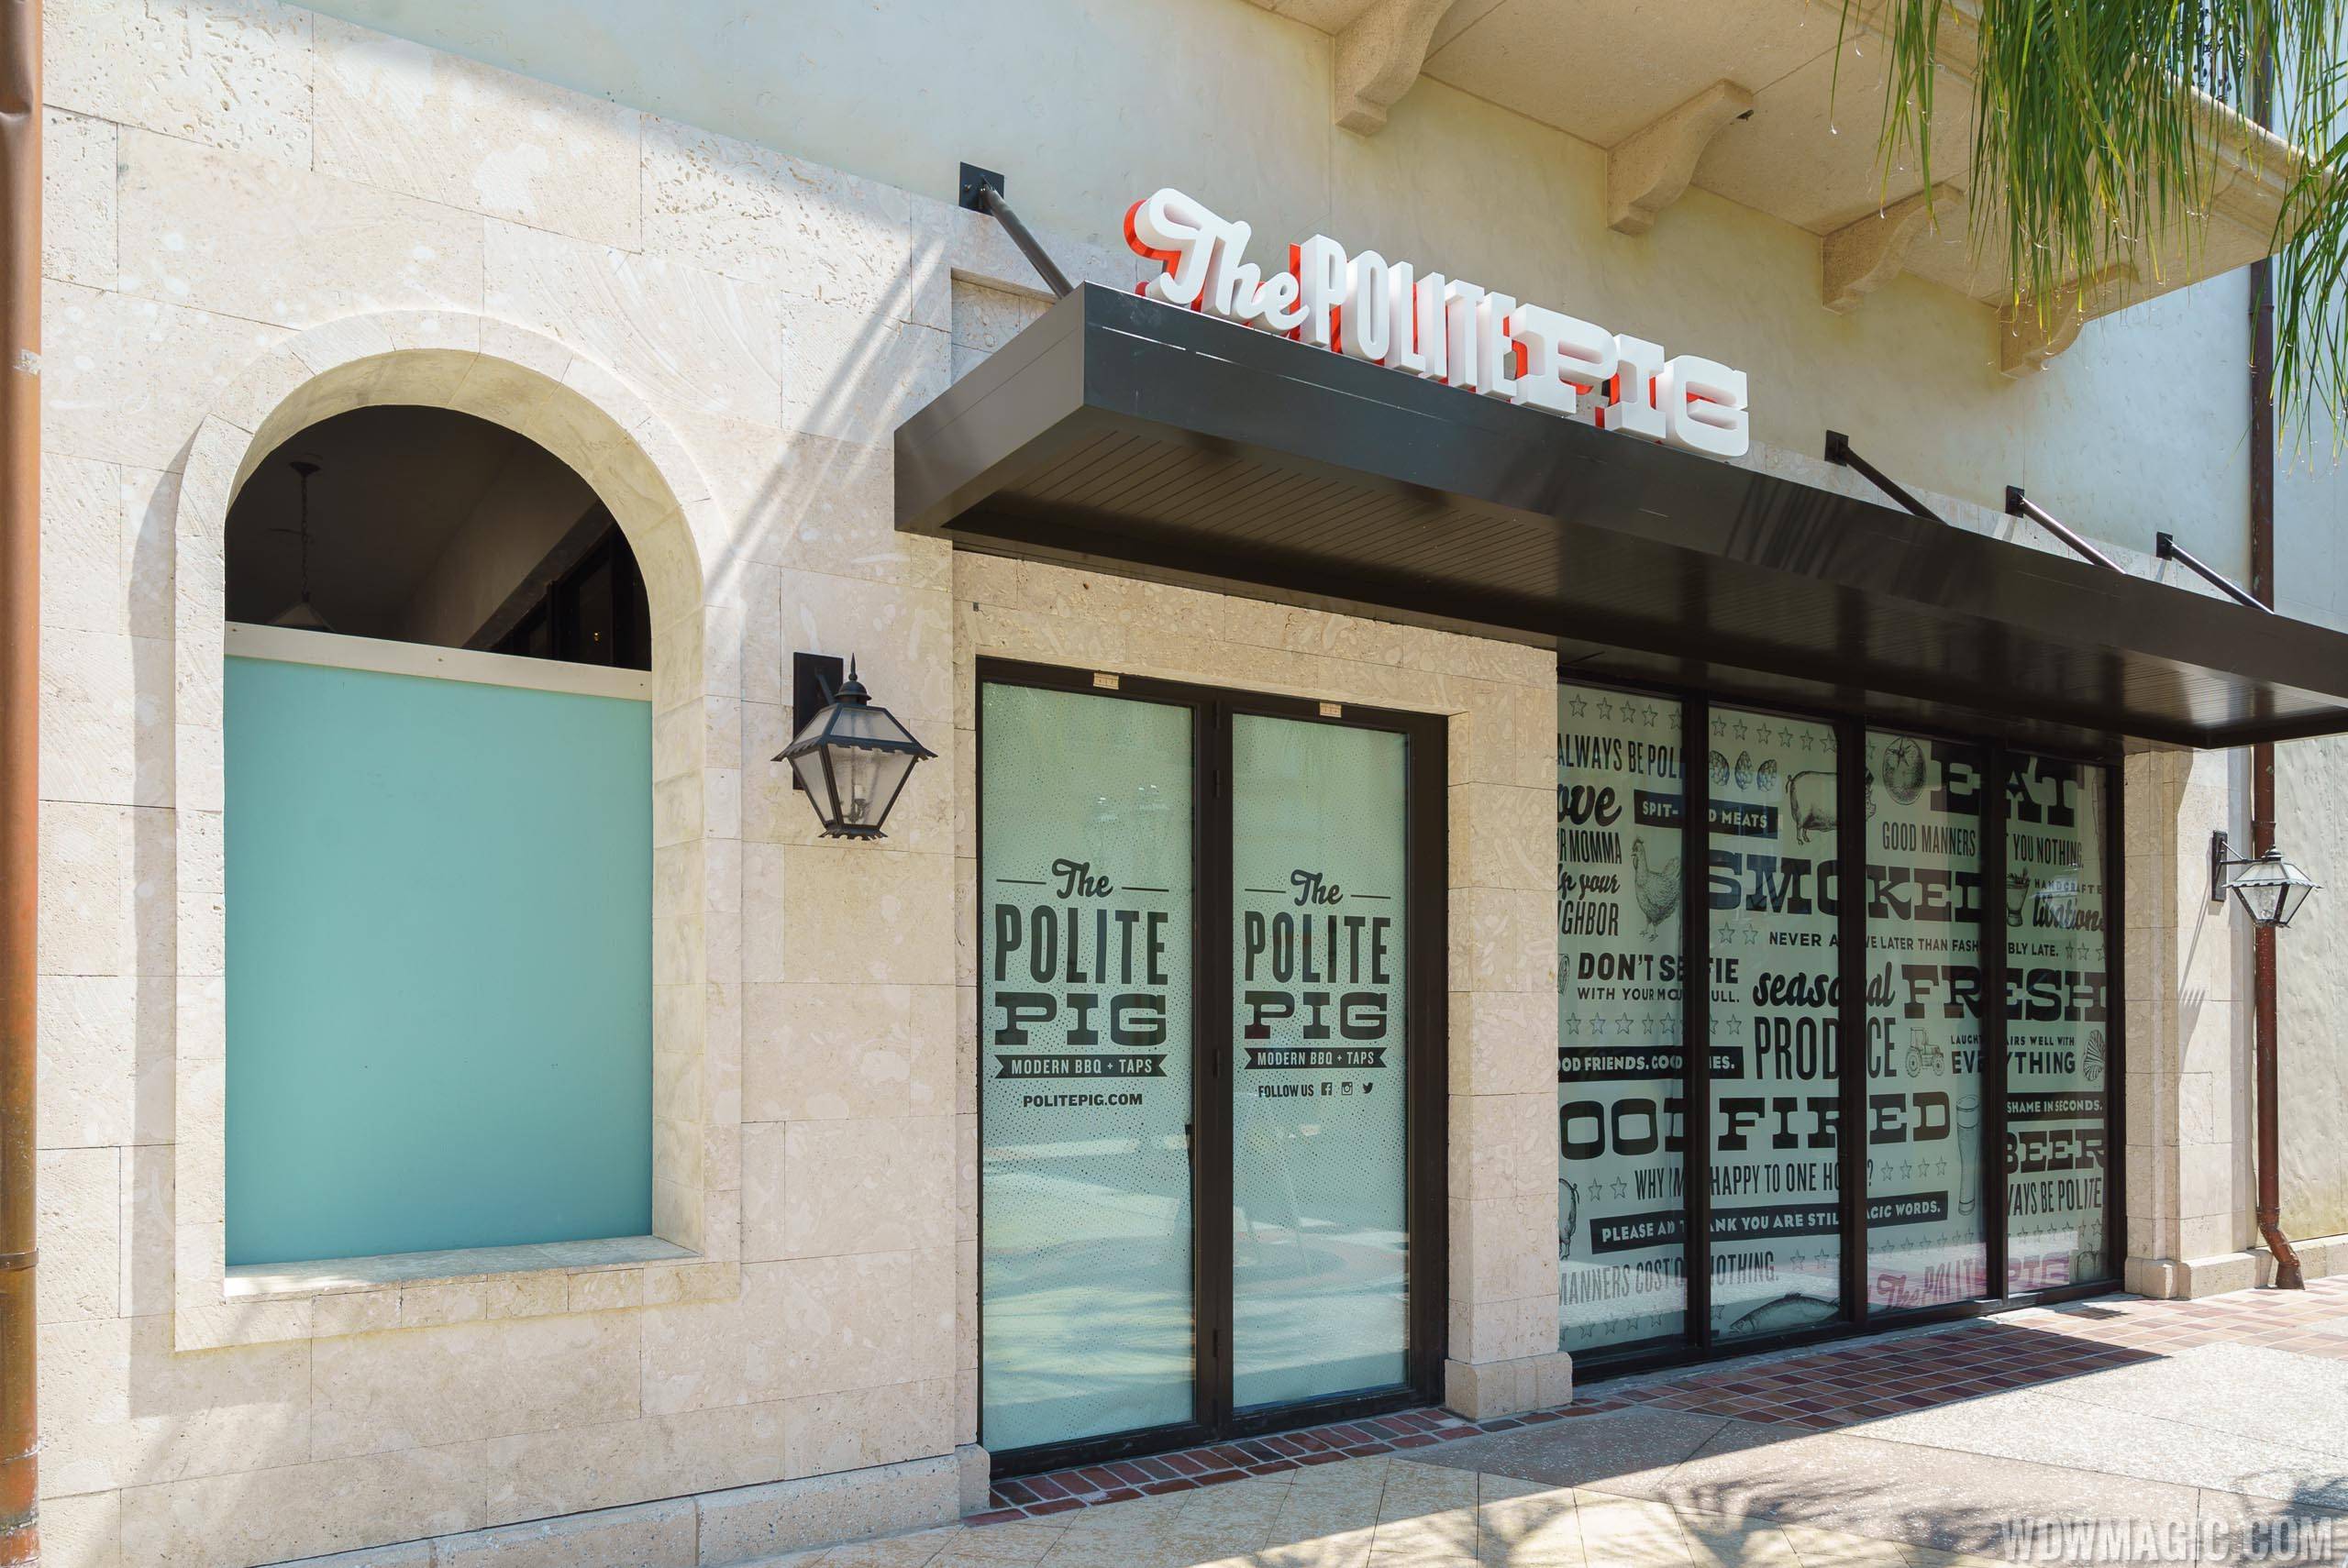 More details on The Polite Pig and a first look at the menu